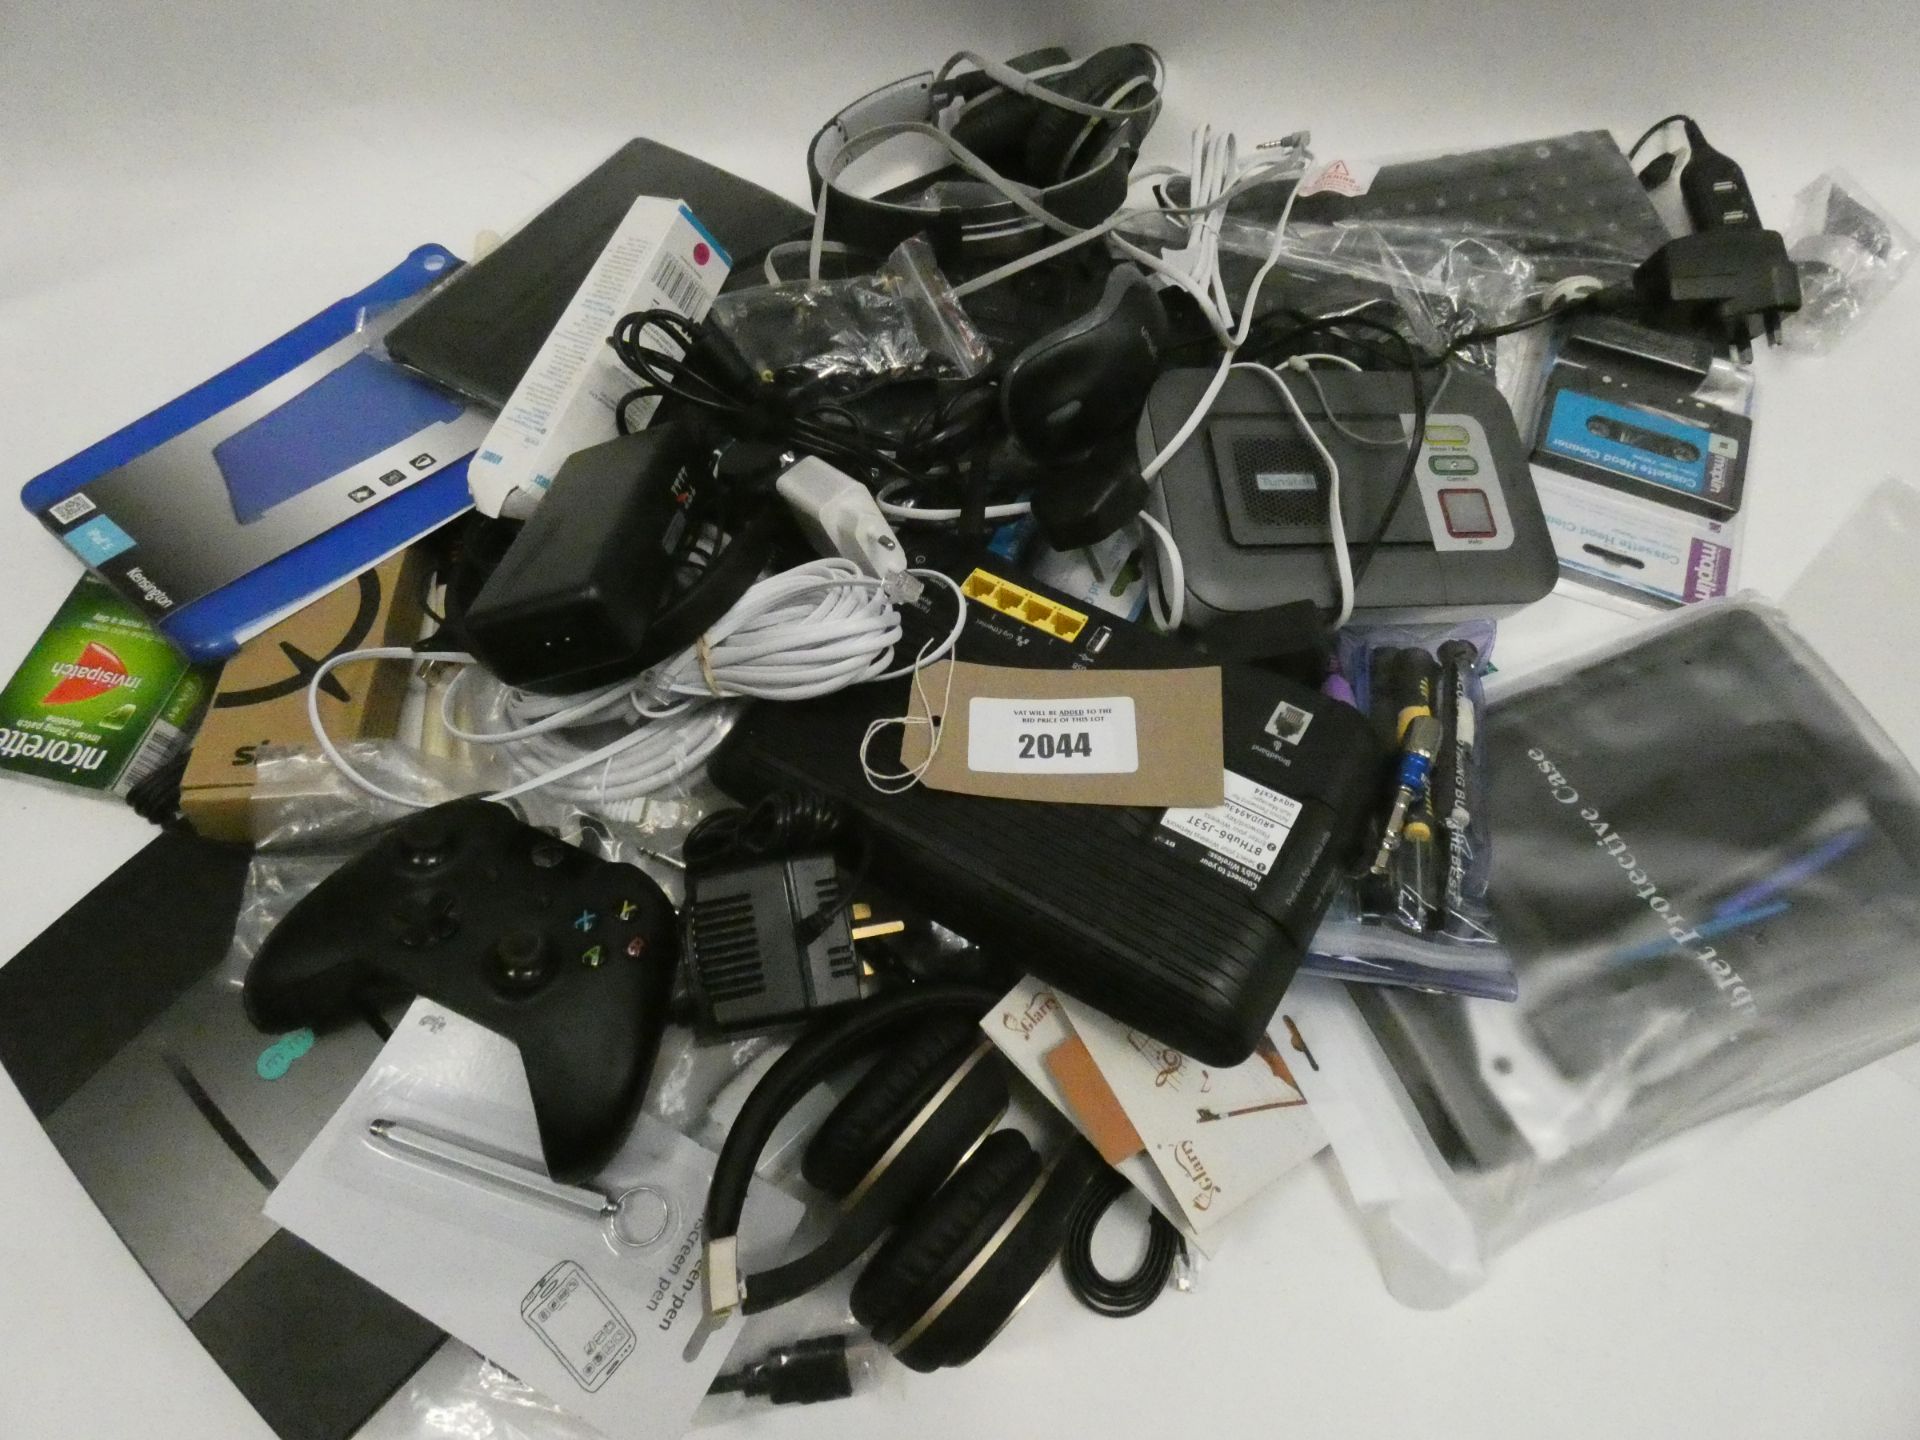 Bag containing miscellaneous electrical items/accessories; PSUs, controllers, spare parts, routers